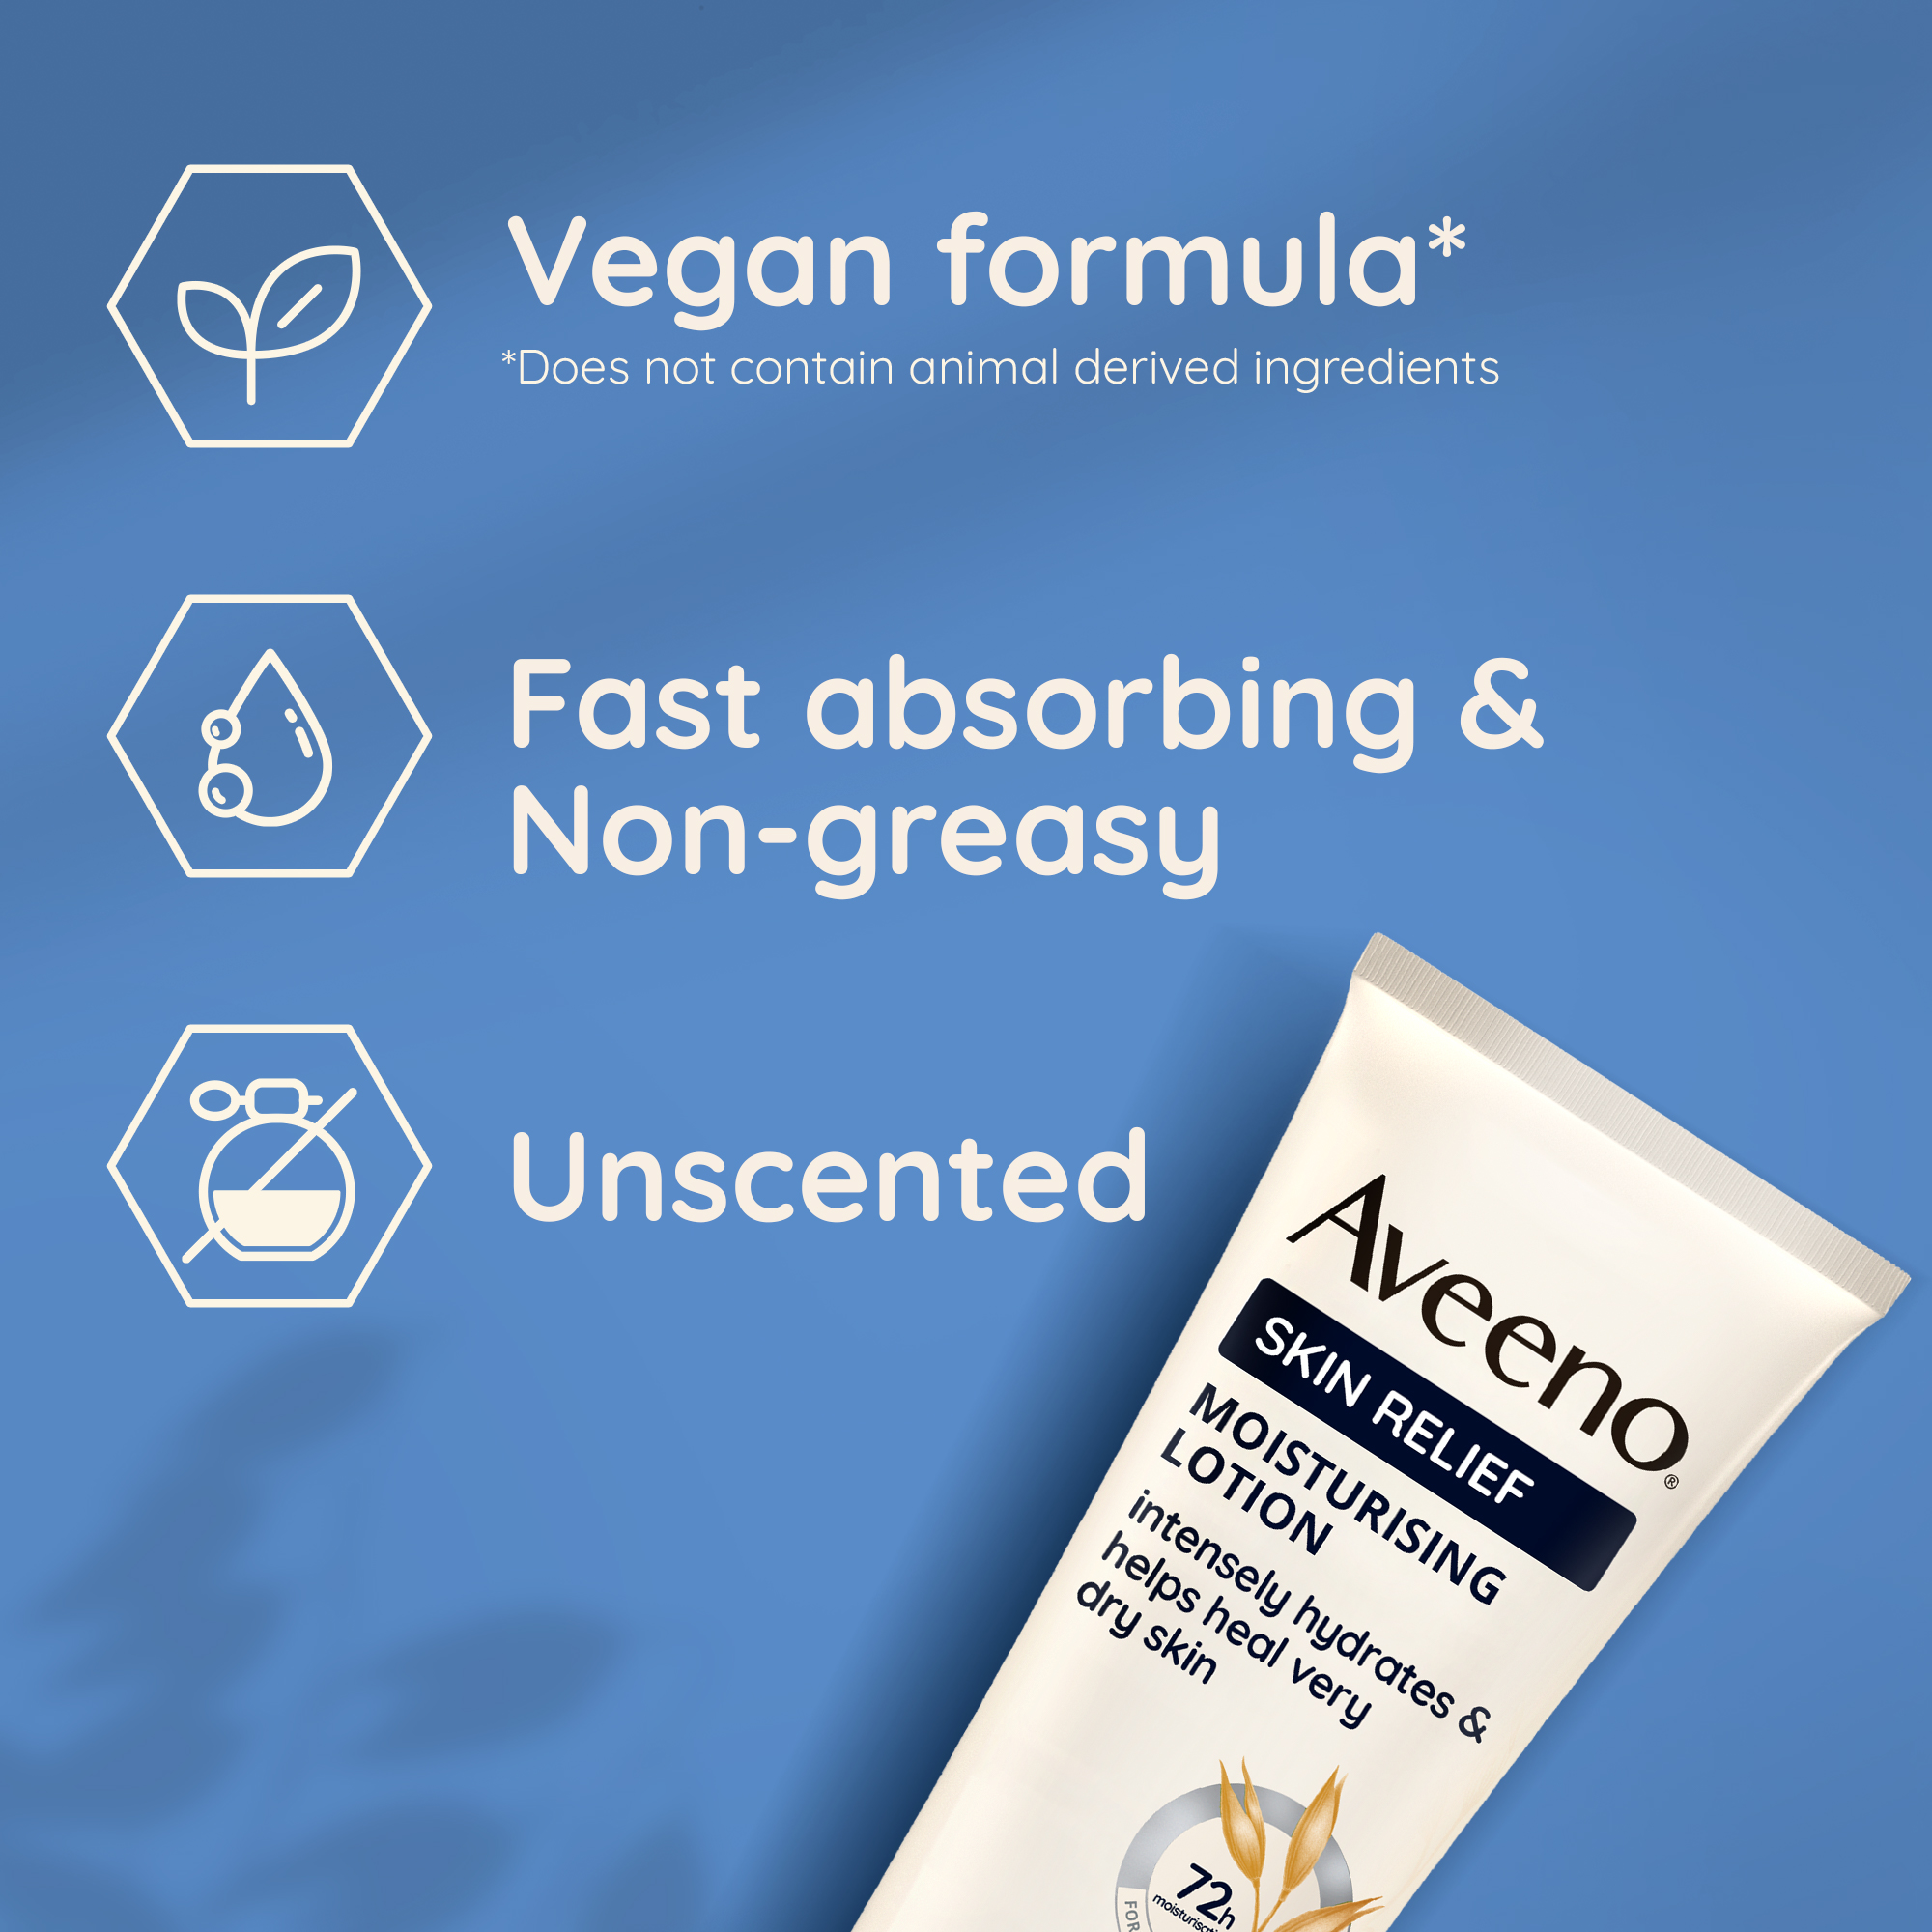 vegan formula, fast absorbing & non-greasy unscented